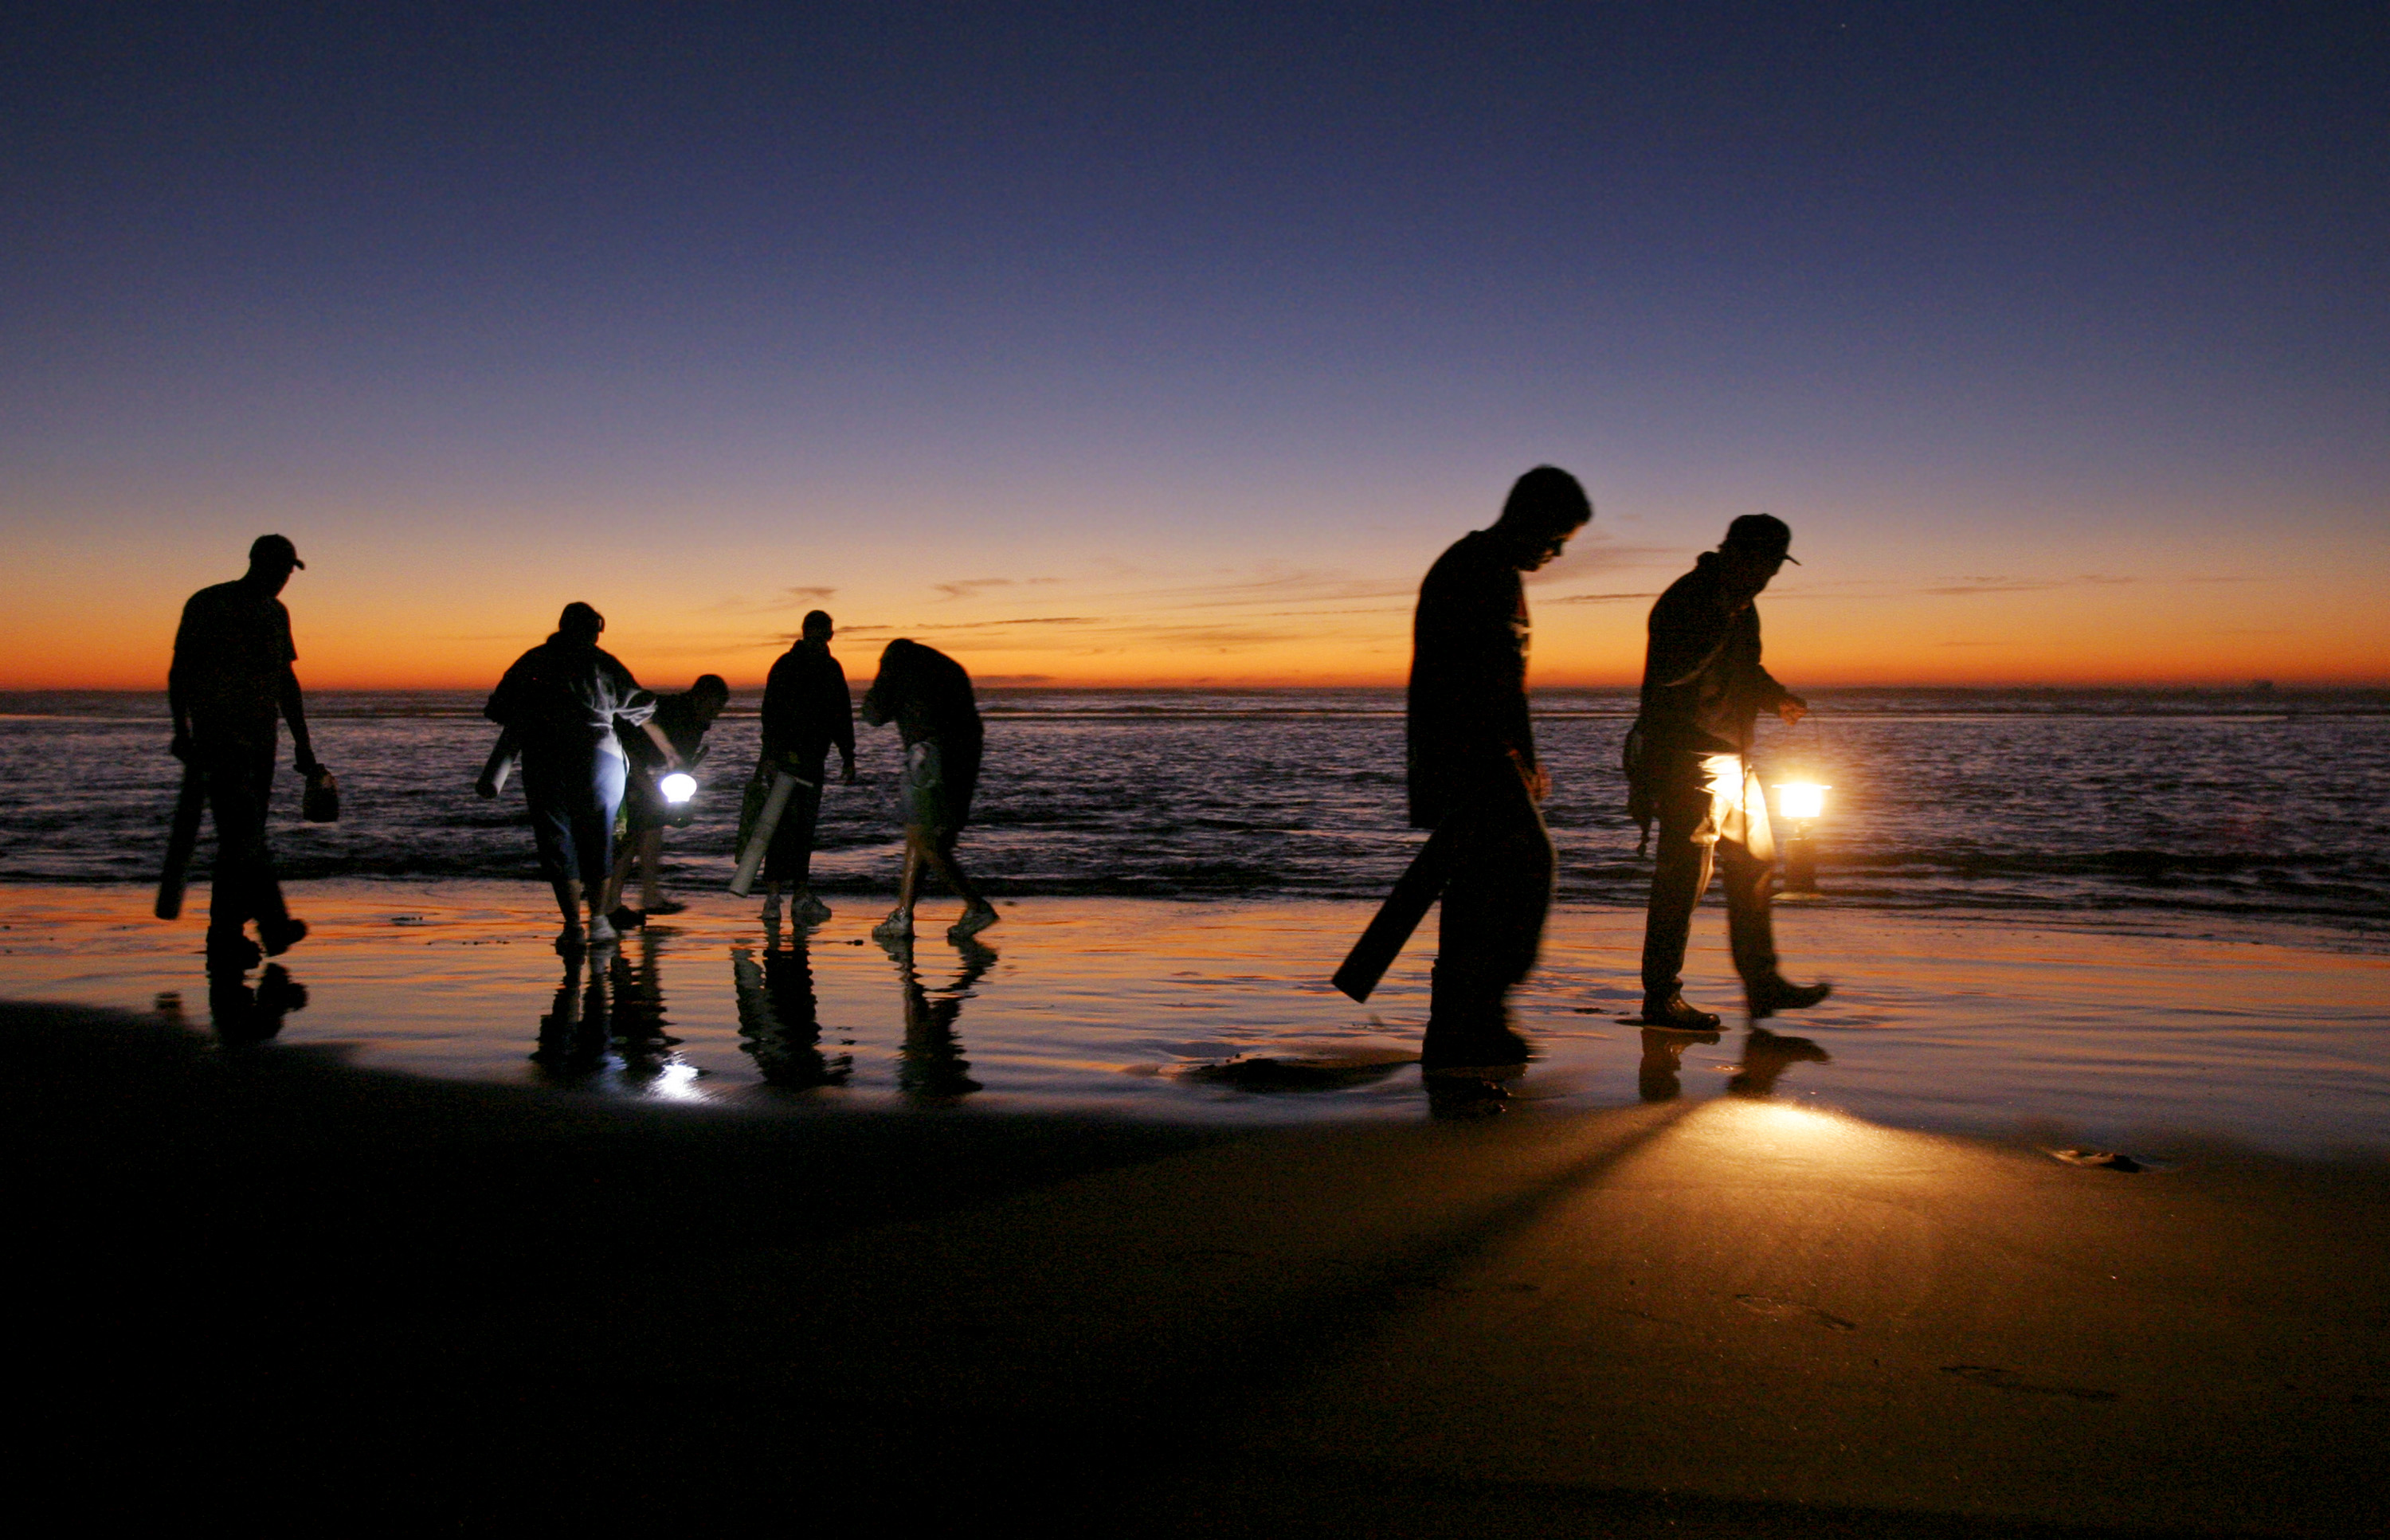 Eager clam diggers with lanterns, clam guns, shovels and buckets in hand search for telling signs of clams at dusk on Washington's Long Beach Peninsula.